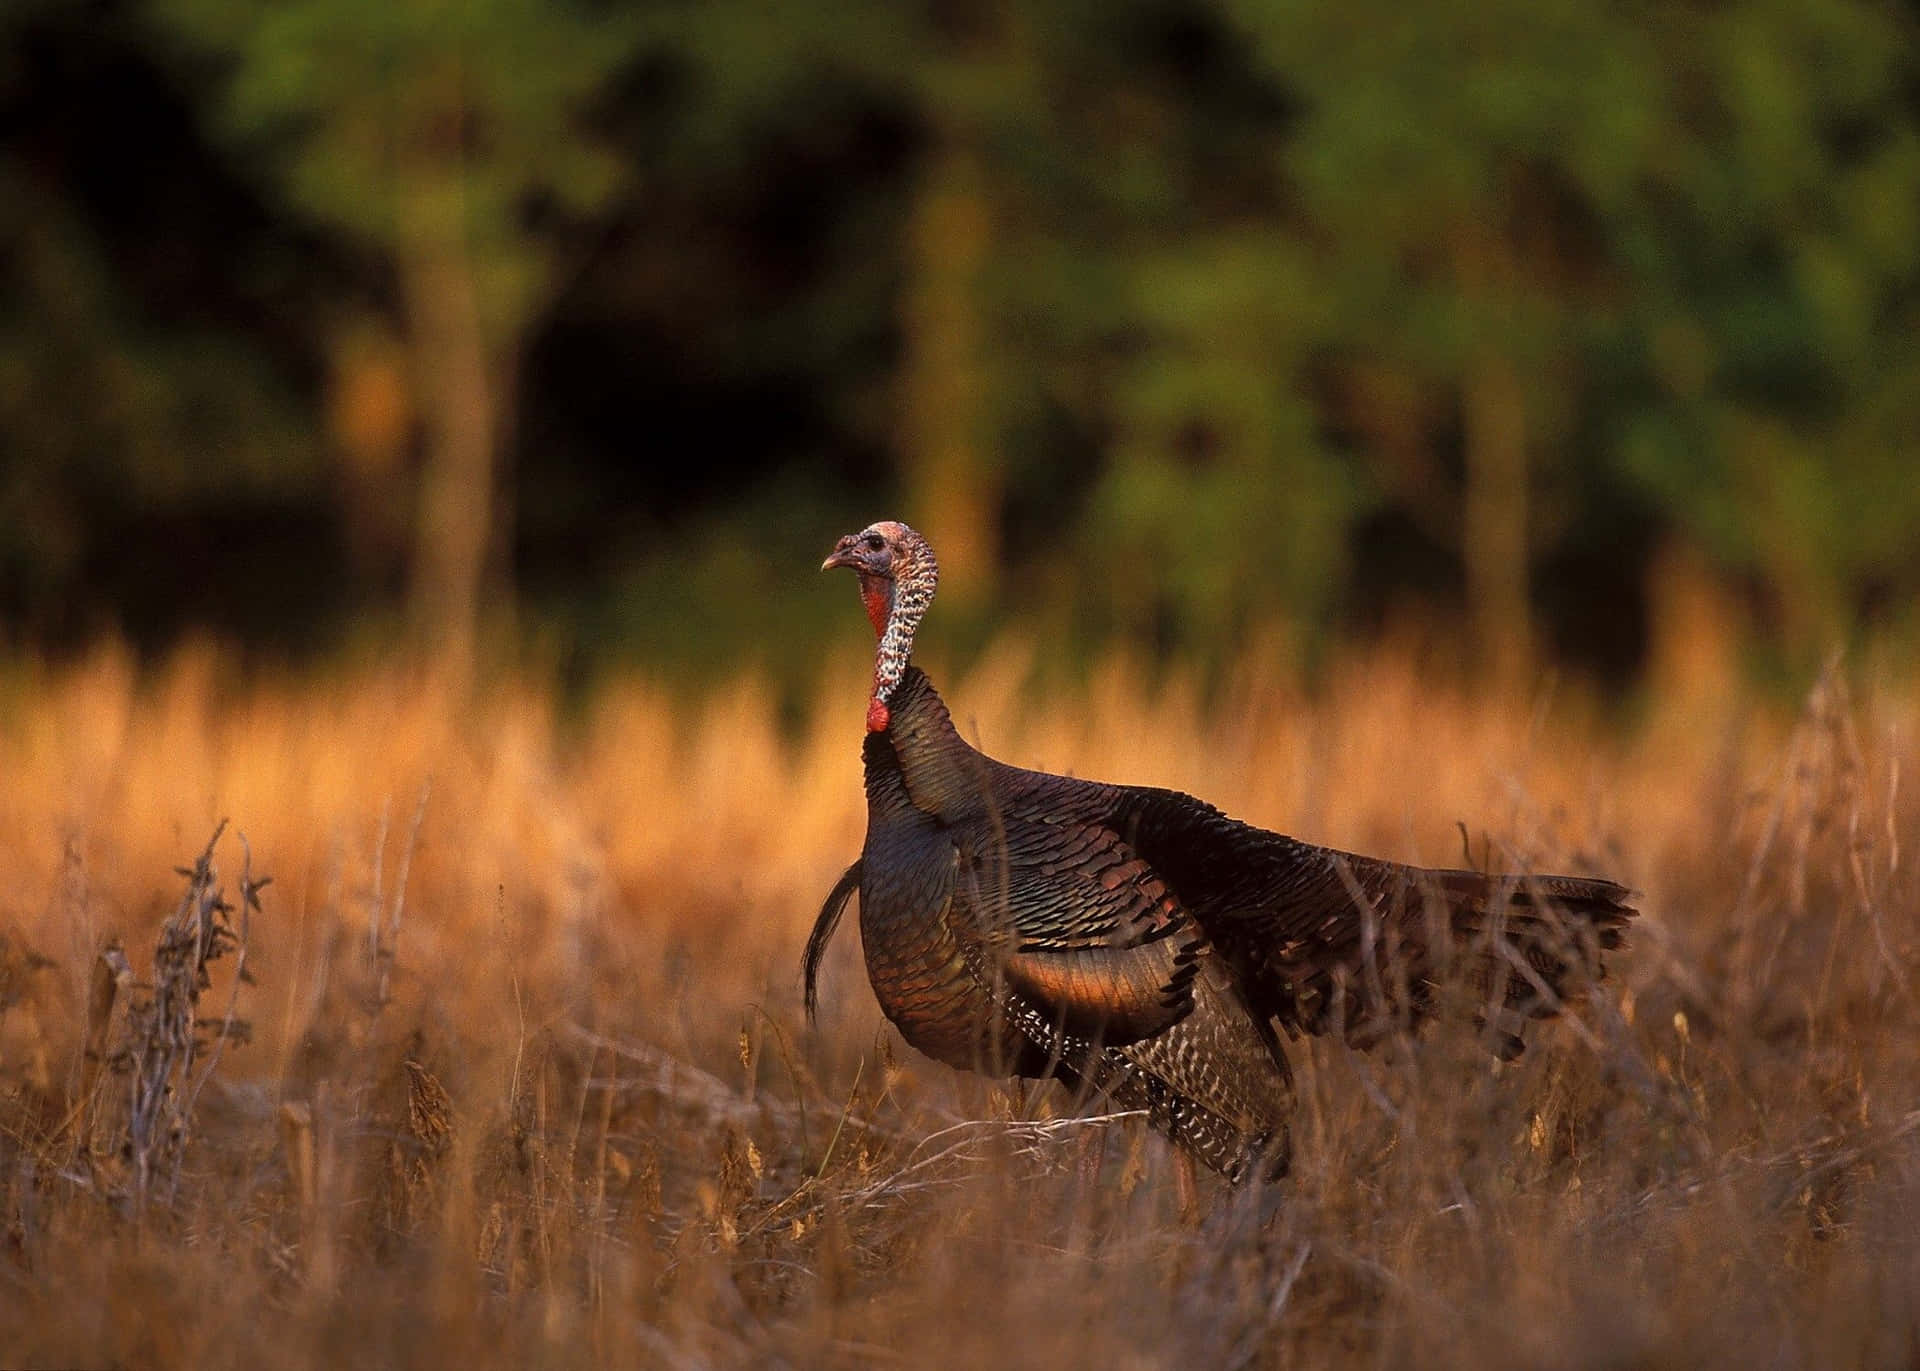 "A colorful, wild turkey in its natural habitat."